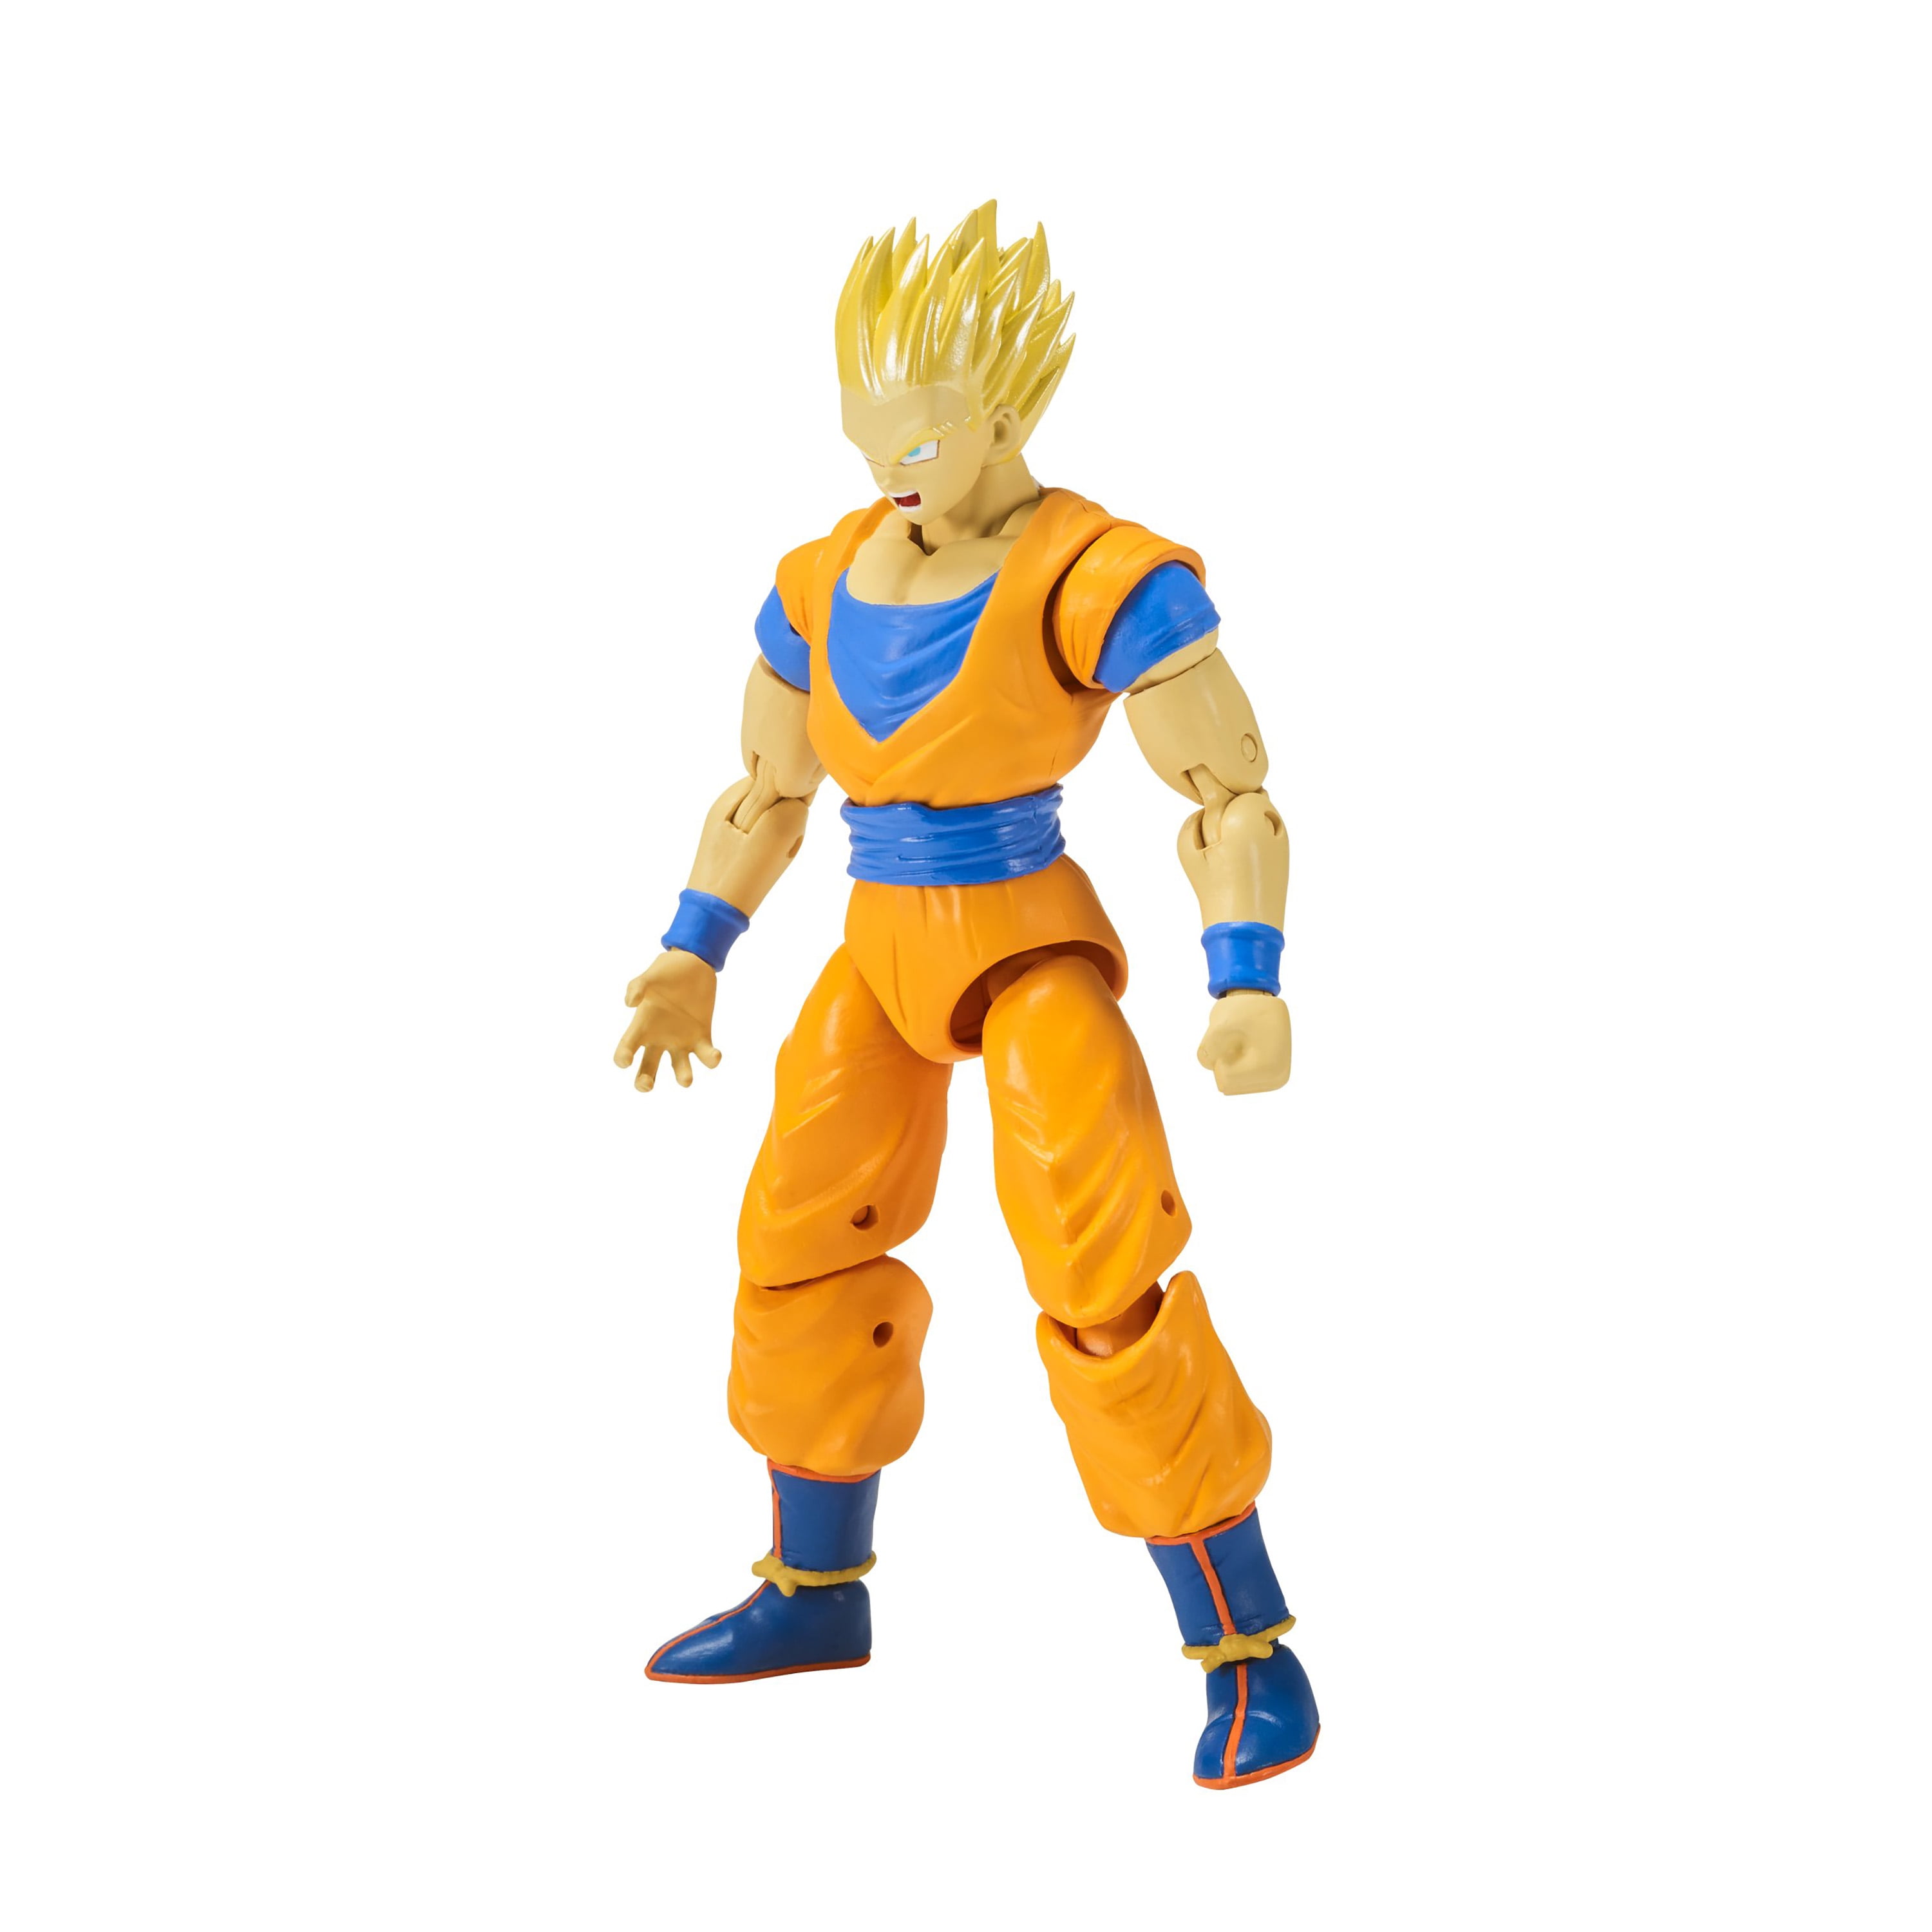 Bandai Dragon Ball Stars Super Android 18 Action Figure Series 12 for sale online 